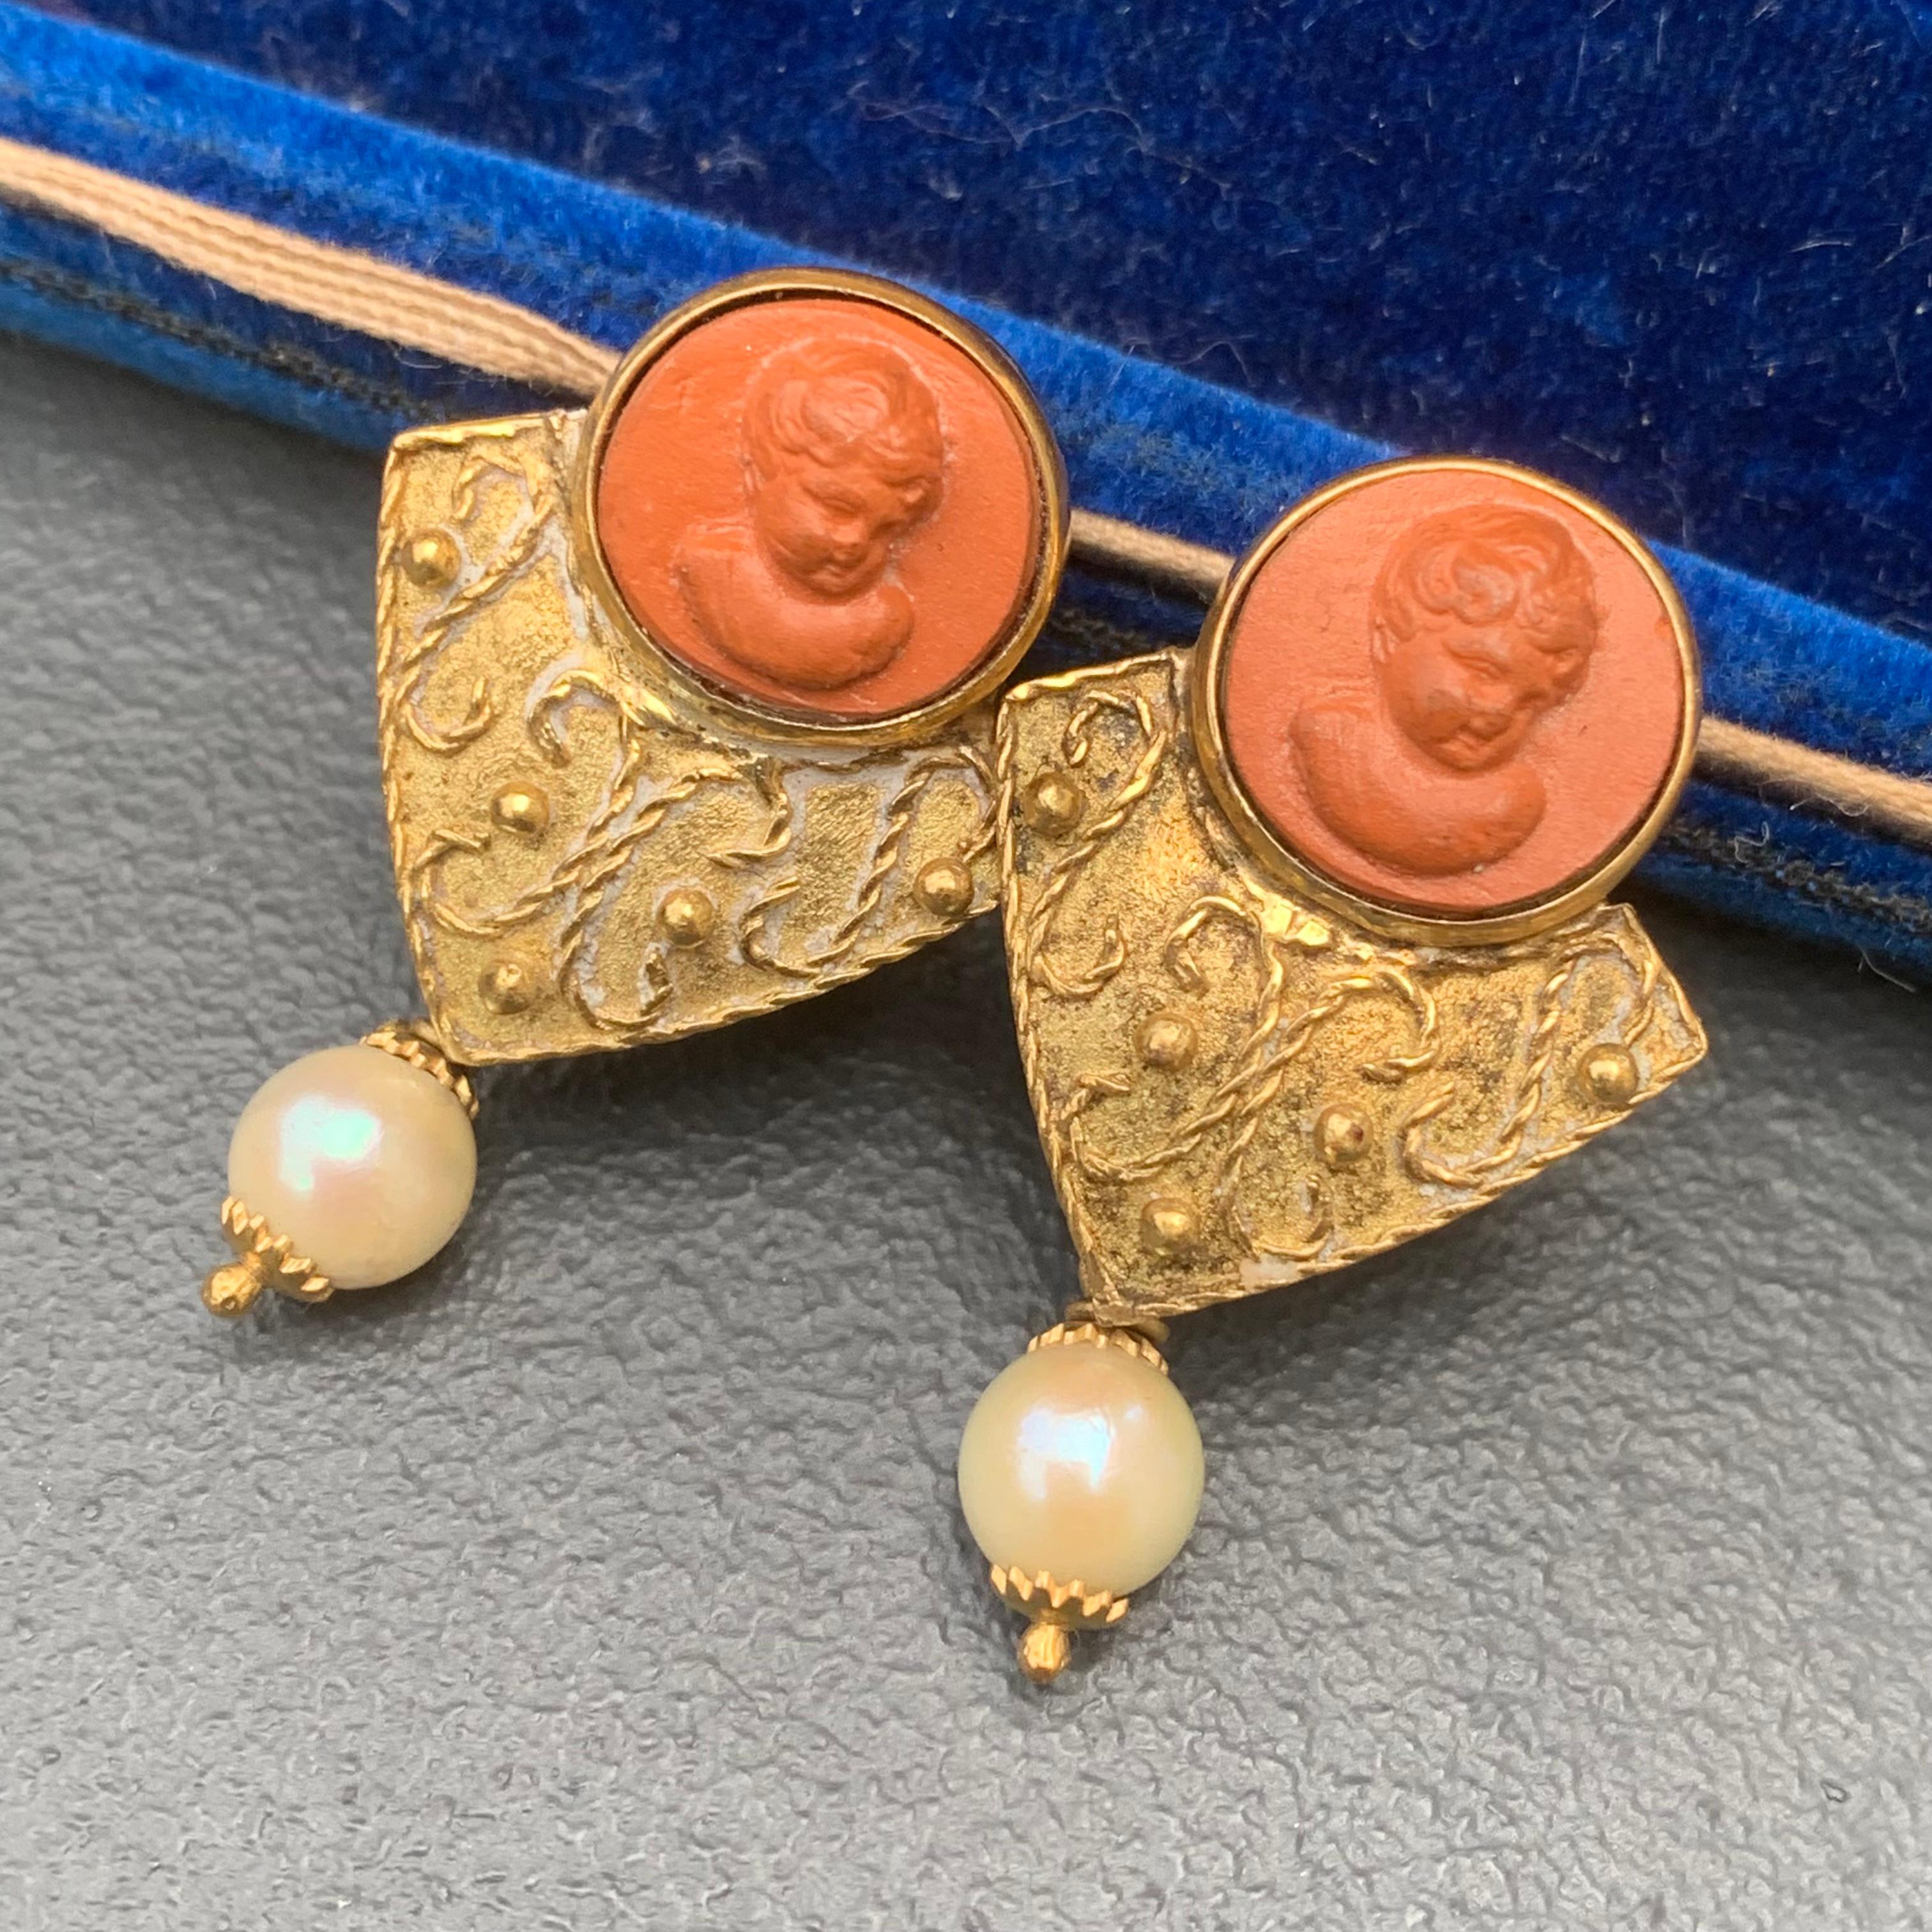 Stunning Antique Victorian era solid 18kt yellow gold earrings for pierced ears featuring carved lava cameo tops . Earrings have Etruscan style applied wire and bead work on front side with cultured pearl dangle .
marked 18kt ITALY with faded stamp